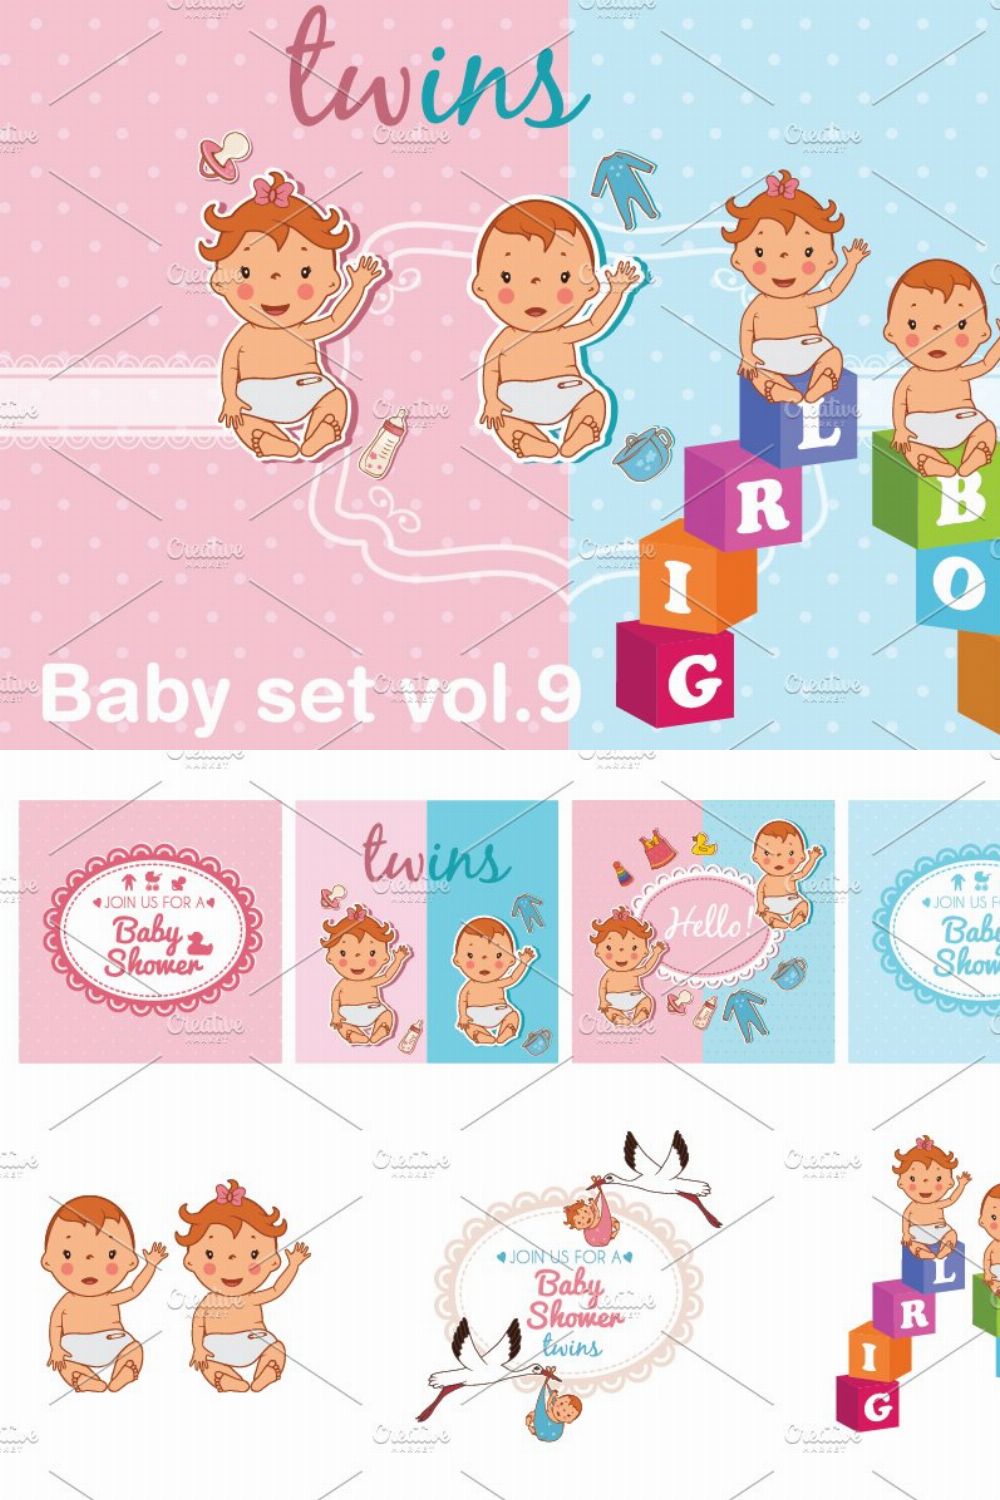 Baby set vol.9 pinterest preview image.